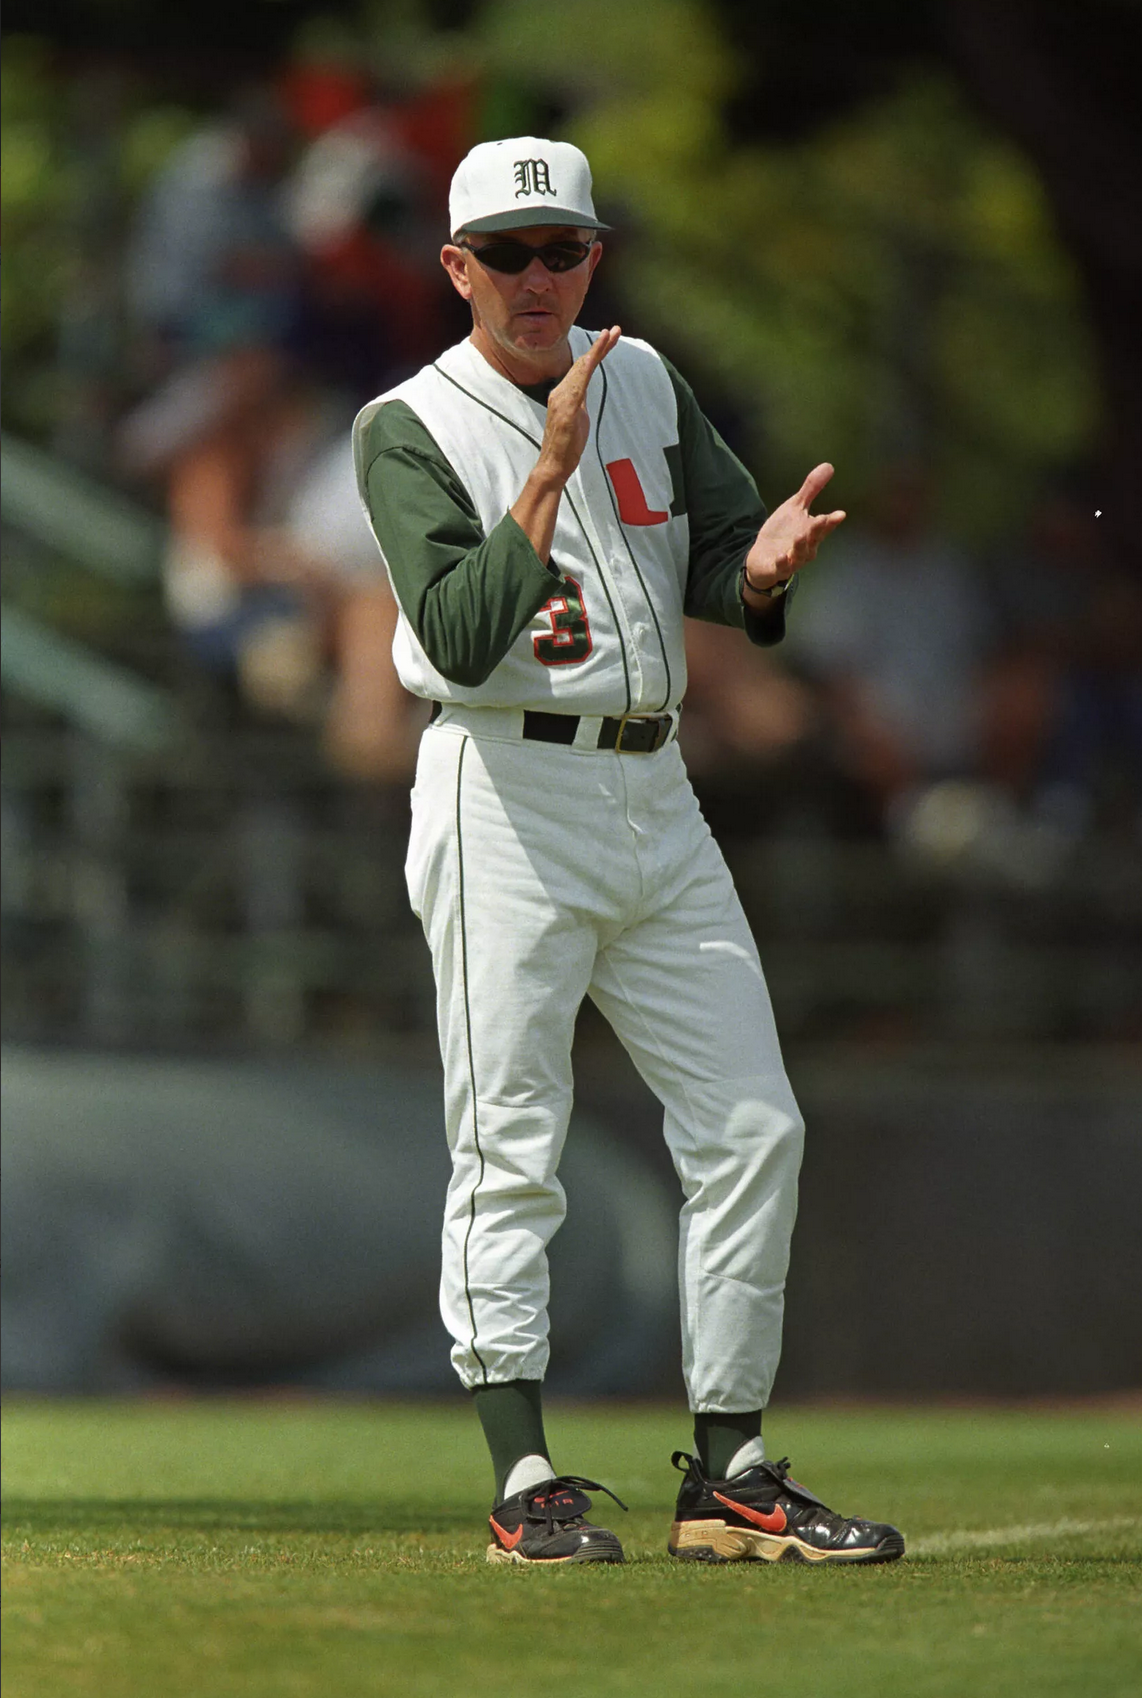 Morris Elected to College Baseball Hall of Fame – School of Education &  Human Development